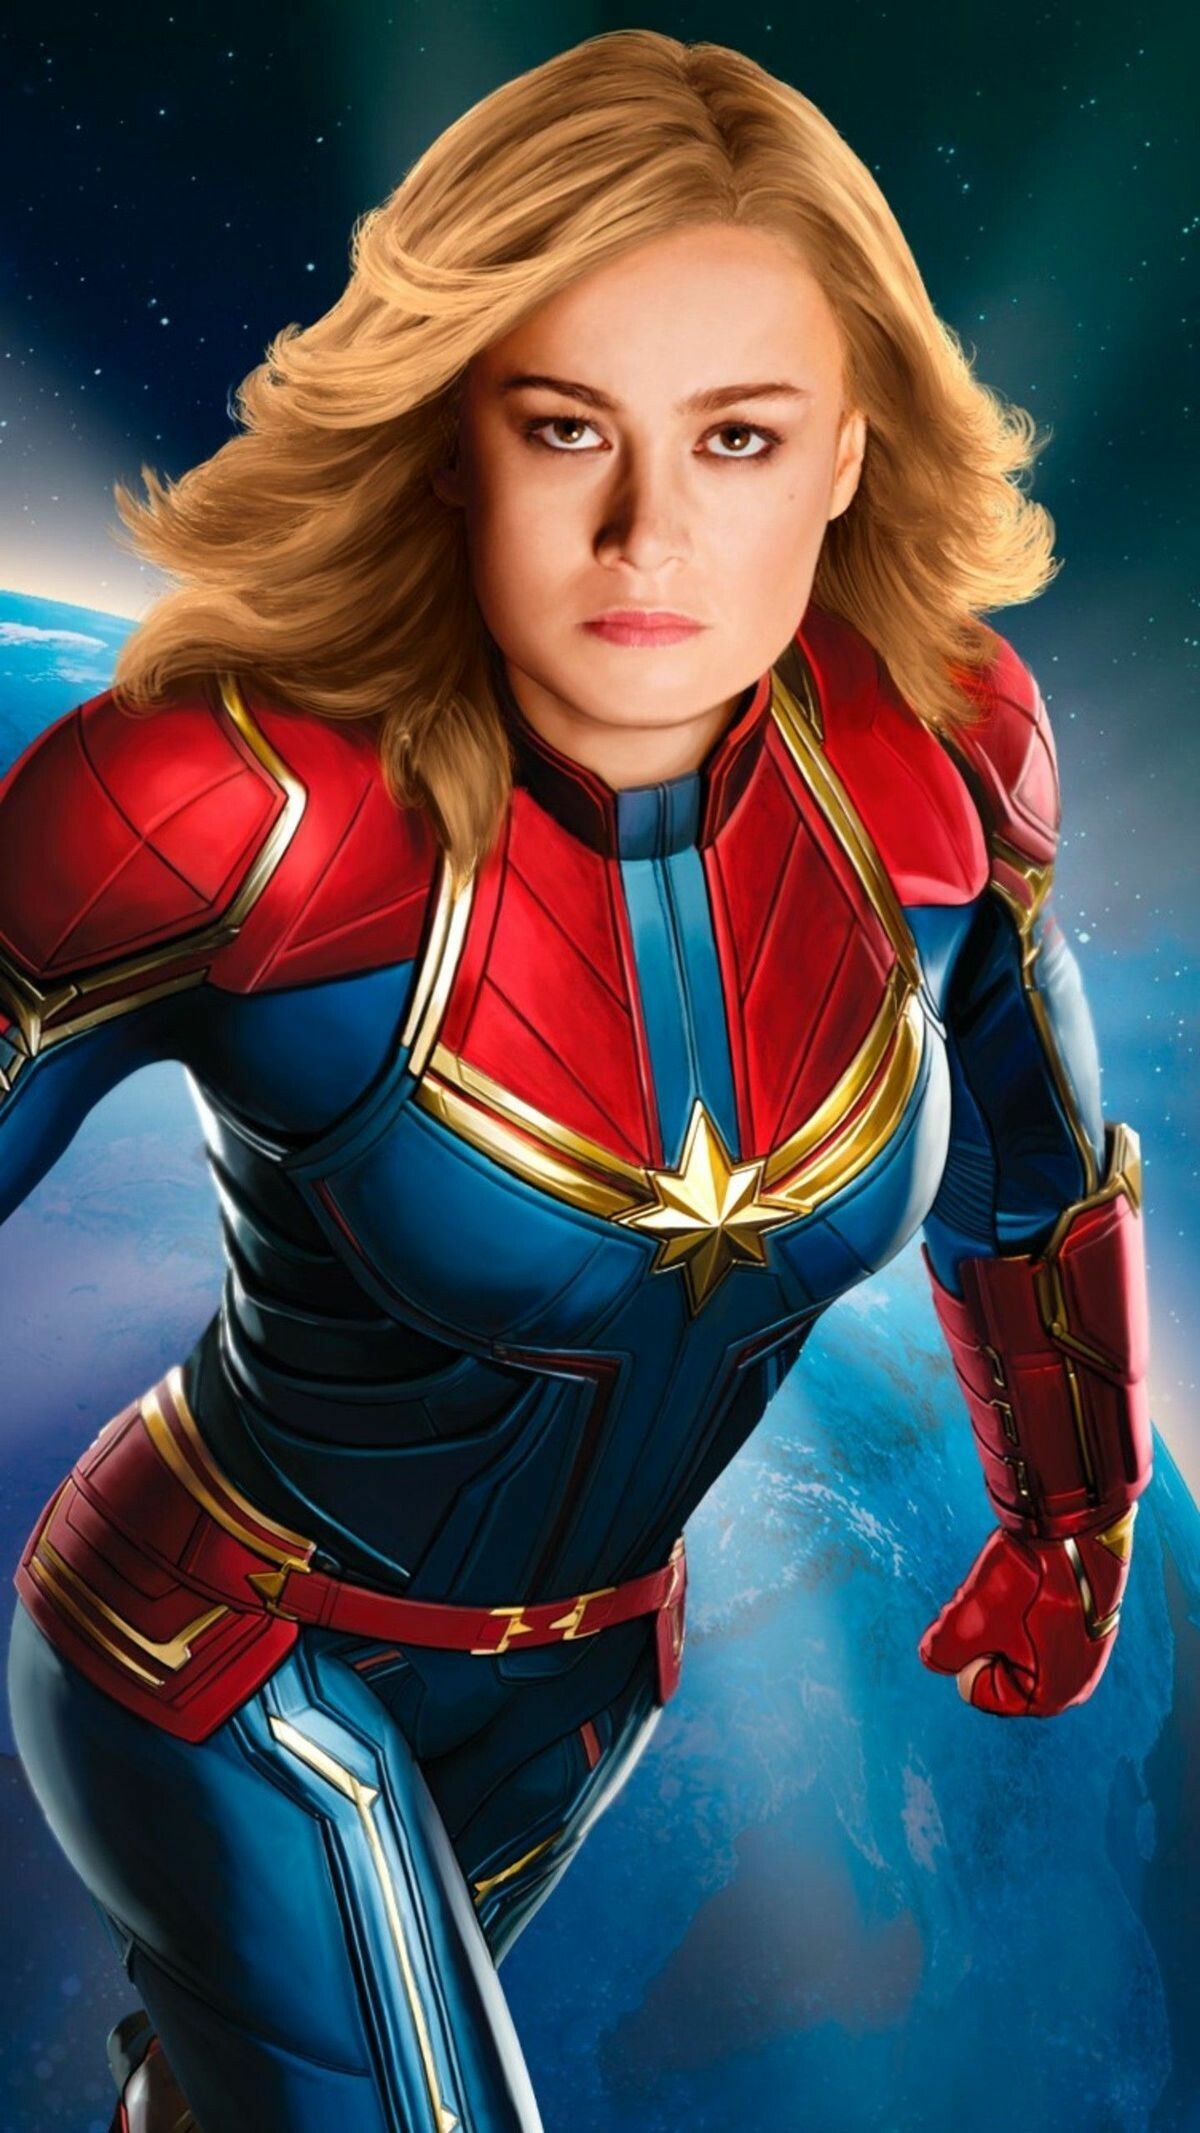 Marvel Heroes: Carol Danvers, First appeared as an officer in the United States Air Force. 1200x2140 HD Background.